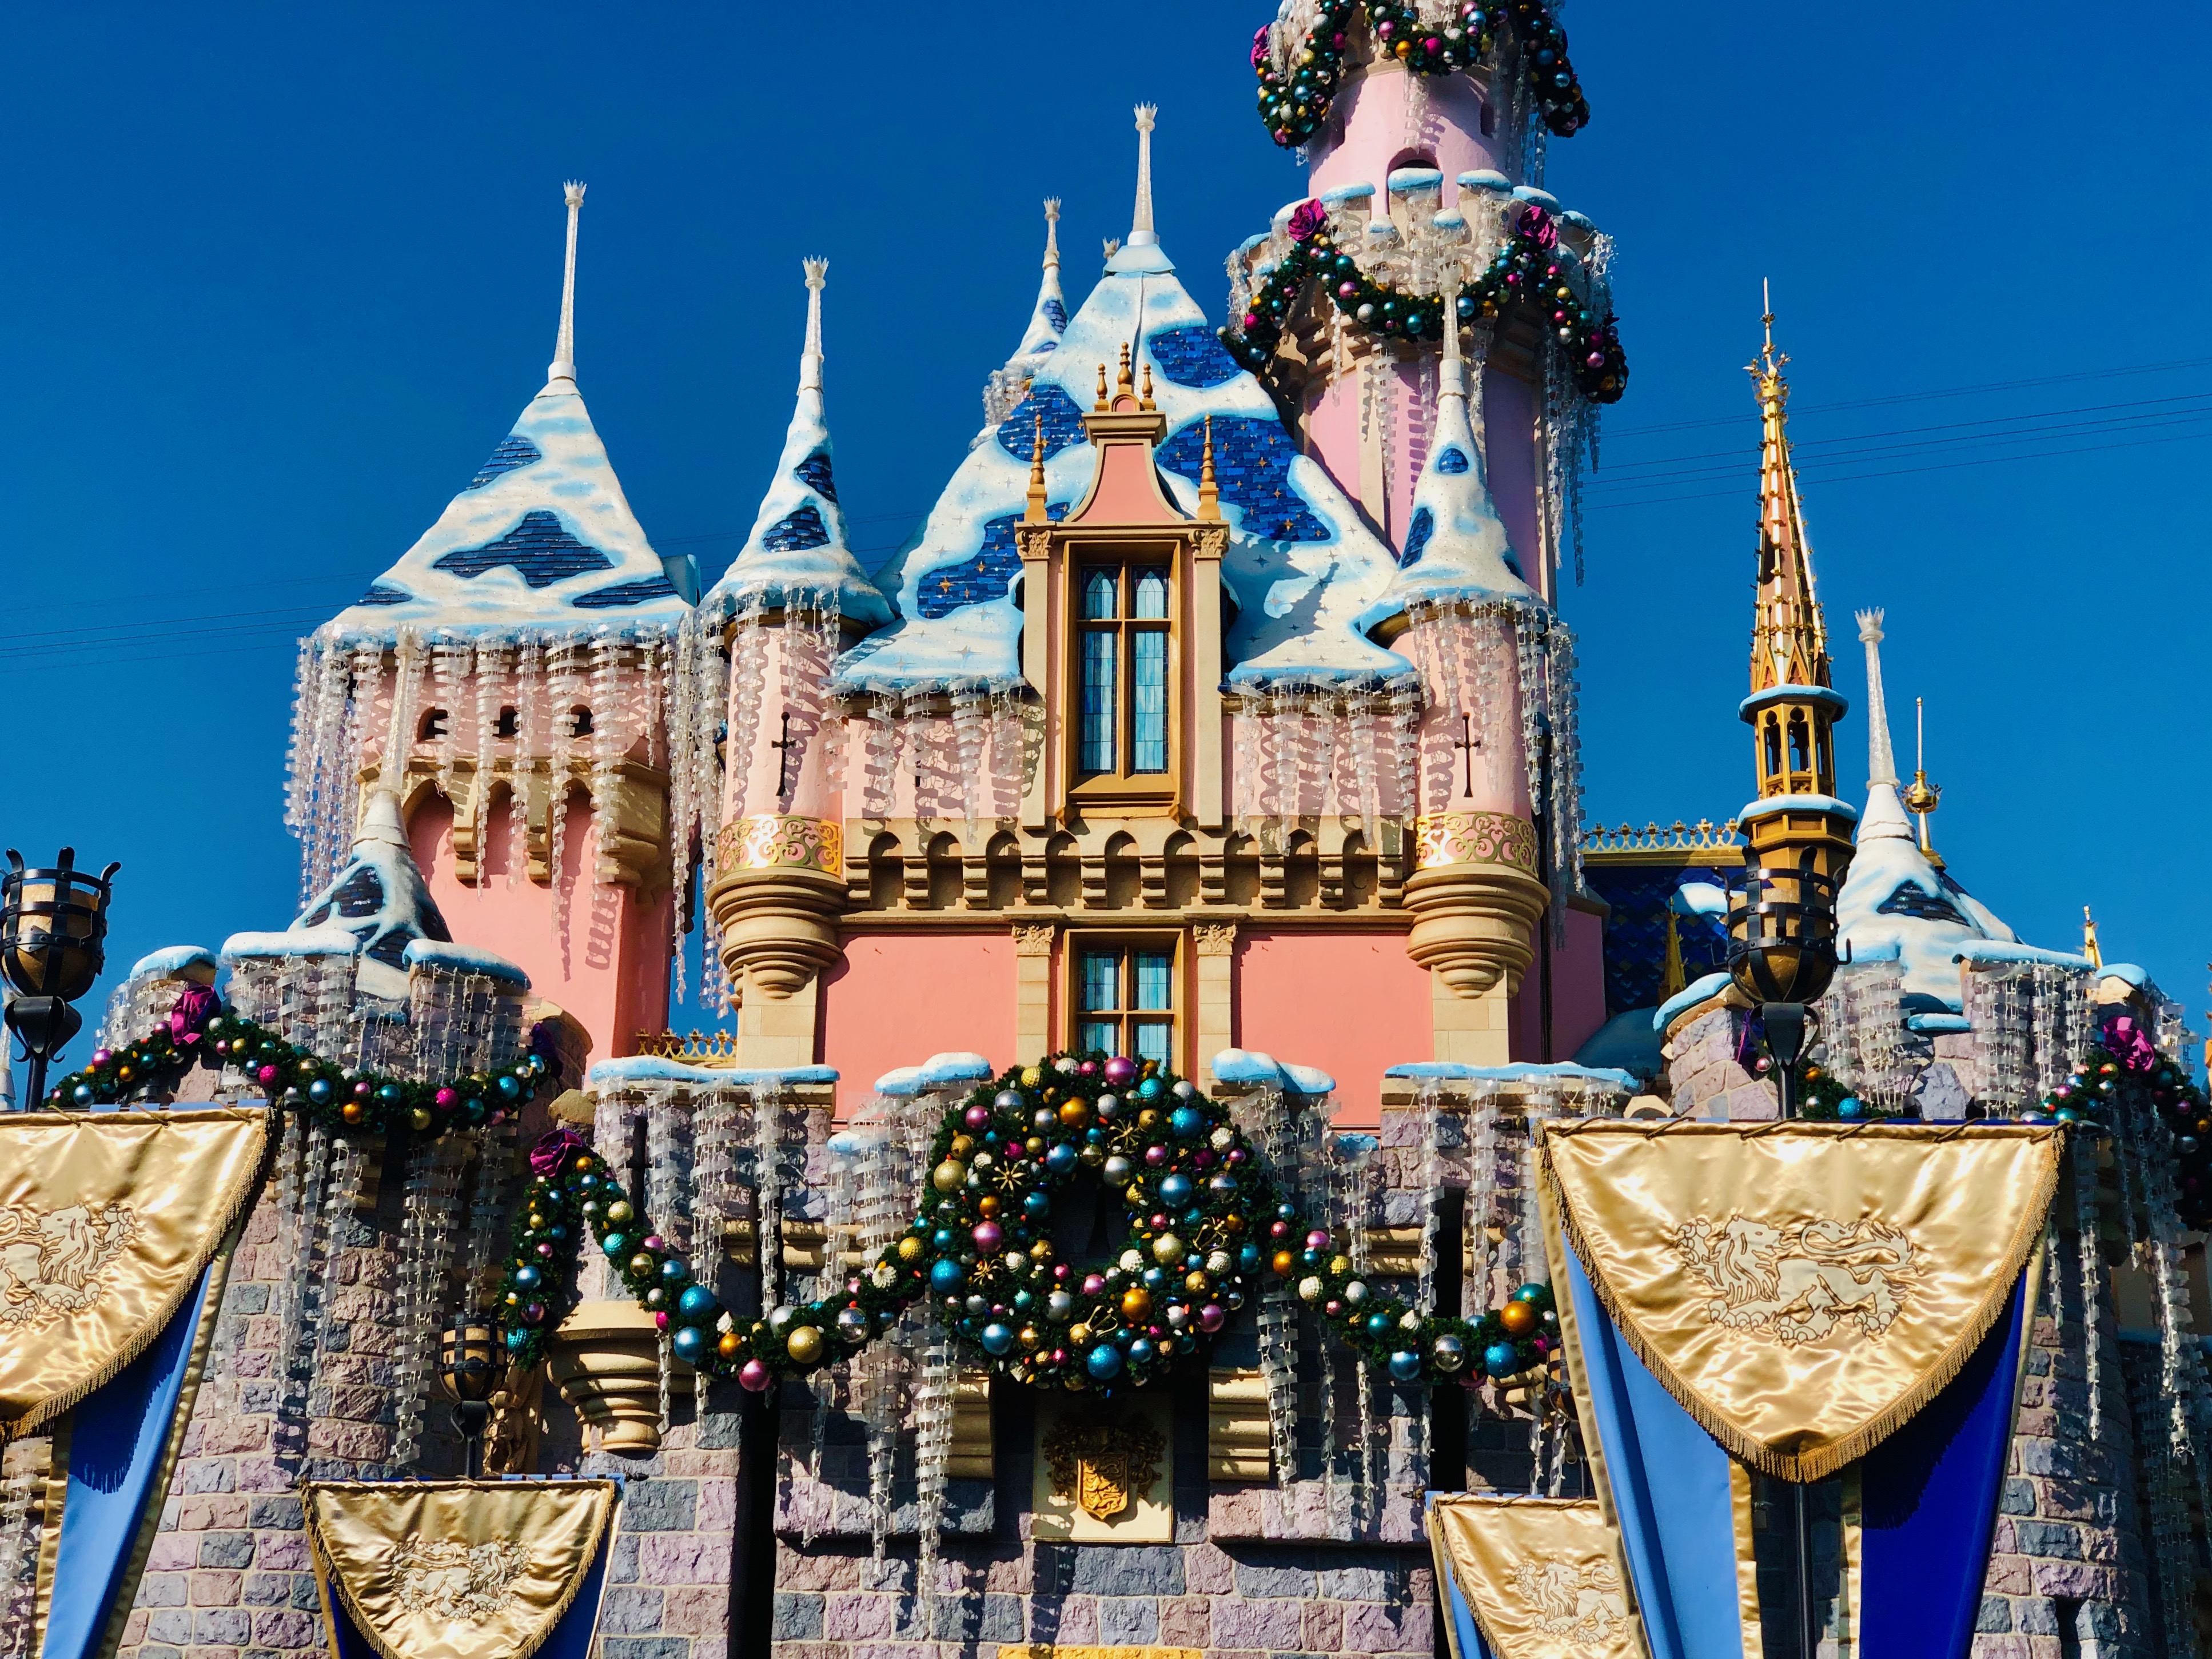 Photo Report Disneyland Park 11 10 19 Christmas Decorations Construction In Tomorrowland Matterhorn Adjusted Hours Galaxy S Edge Activities Etc Wdw News Today